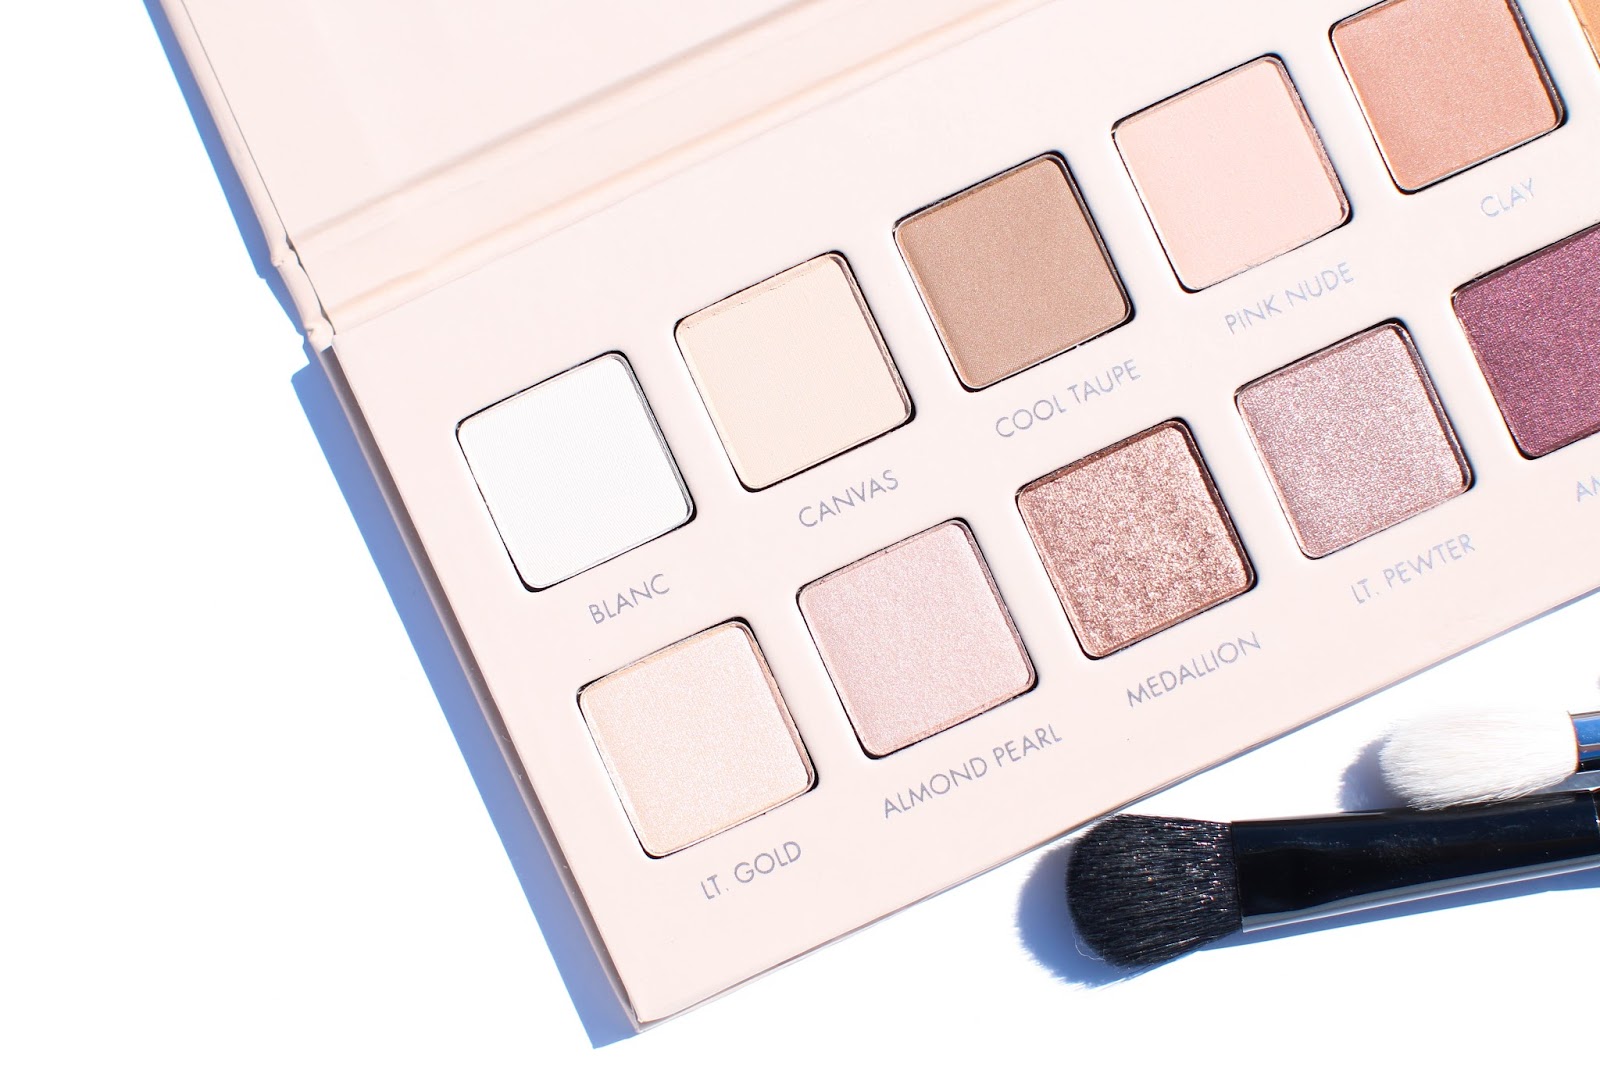 Review of the New Lorac Pro Palette 3 with Swatches